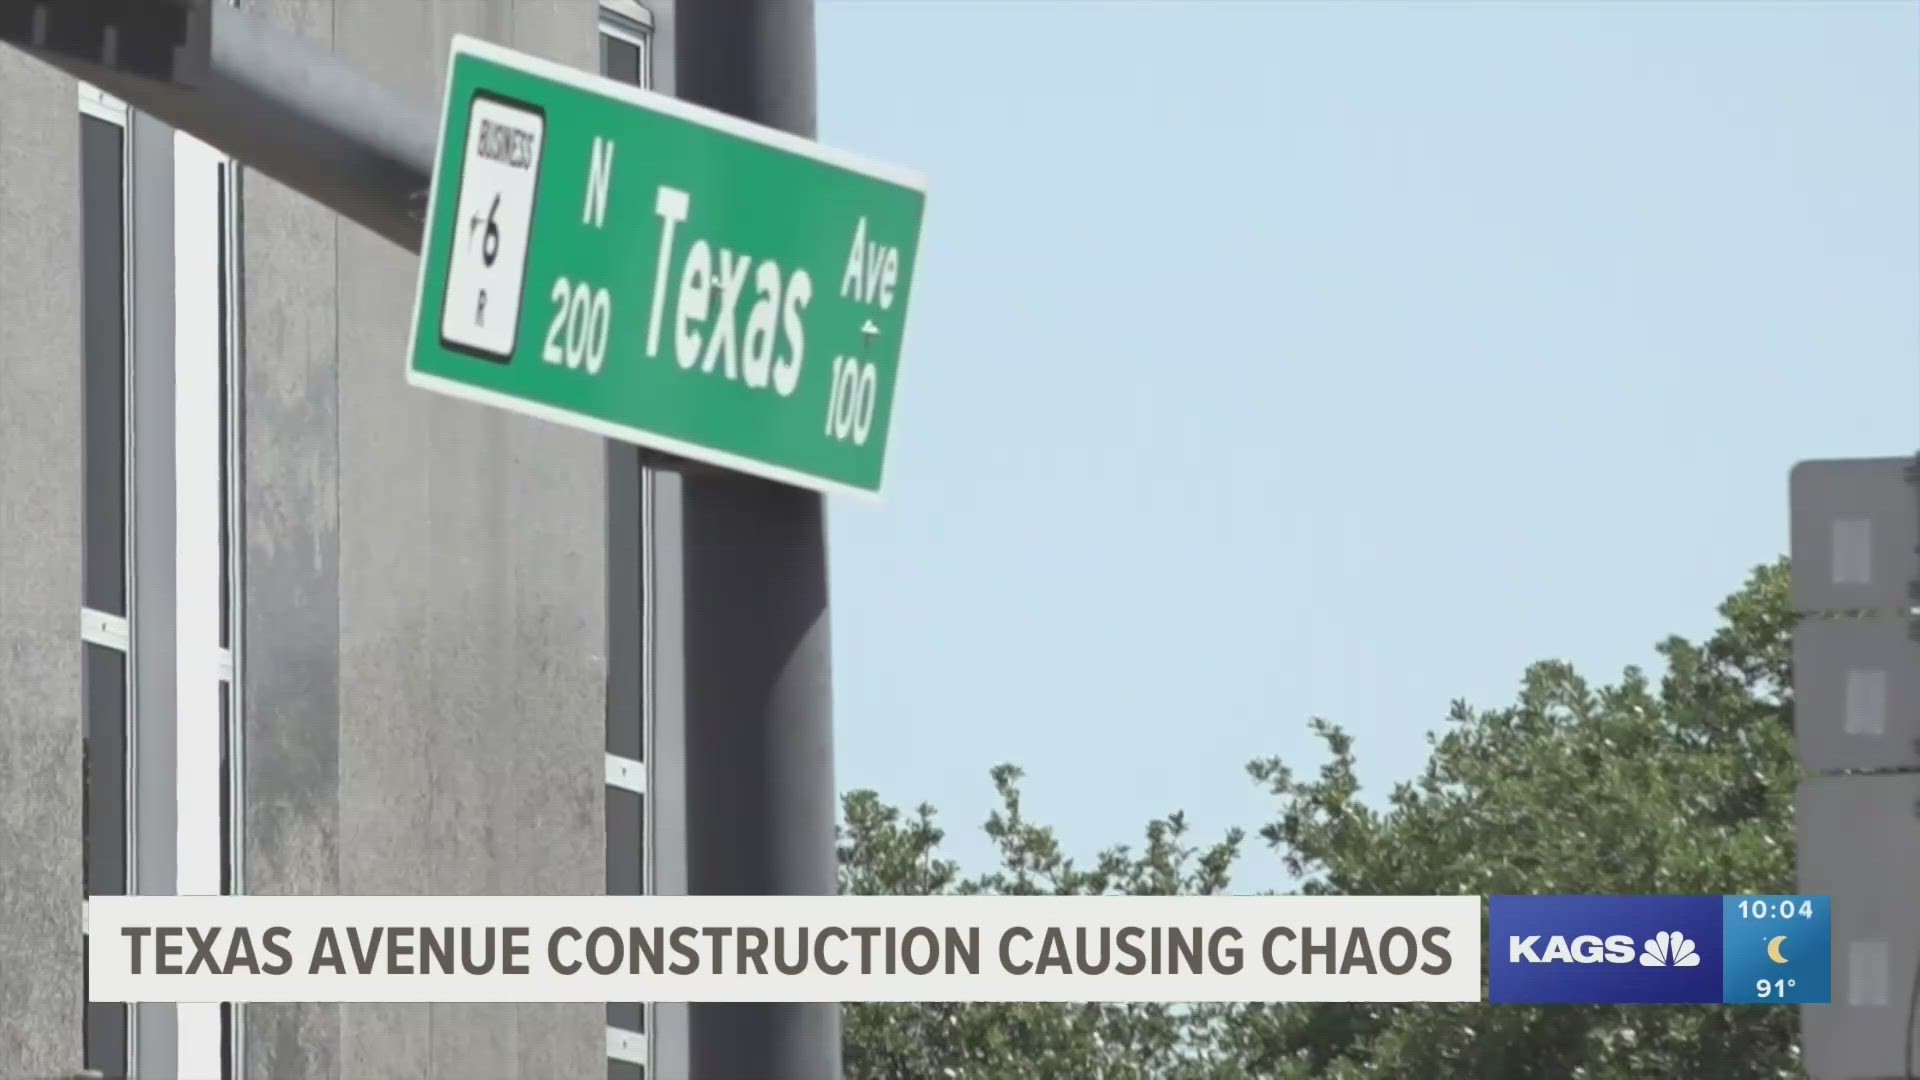 Despite groans from residents about increased commute times to destinations on Texas Avenue, TxDOT says there's been a 65% reduction in crashes.